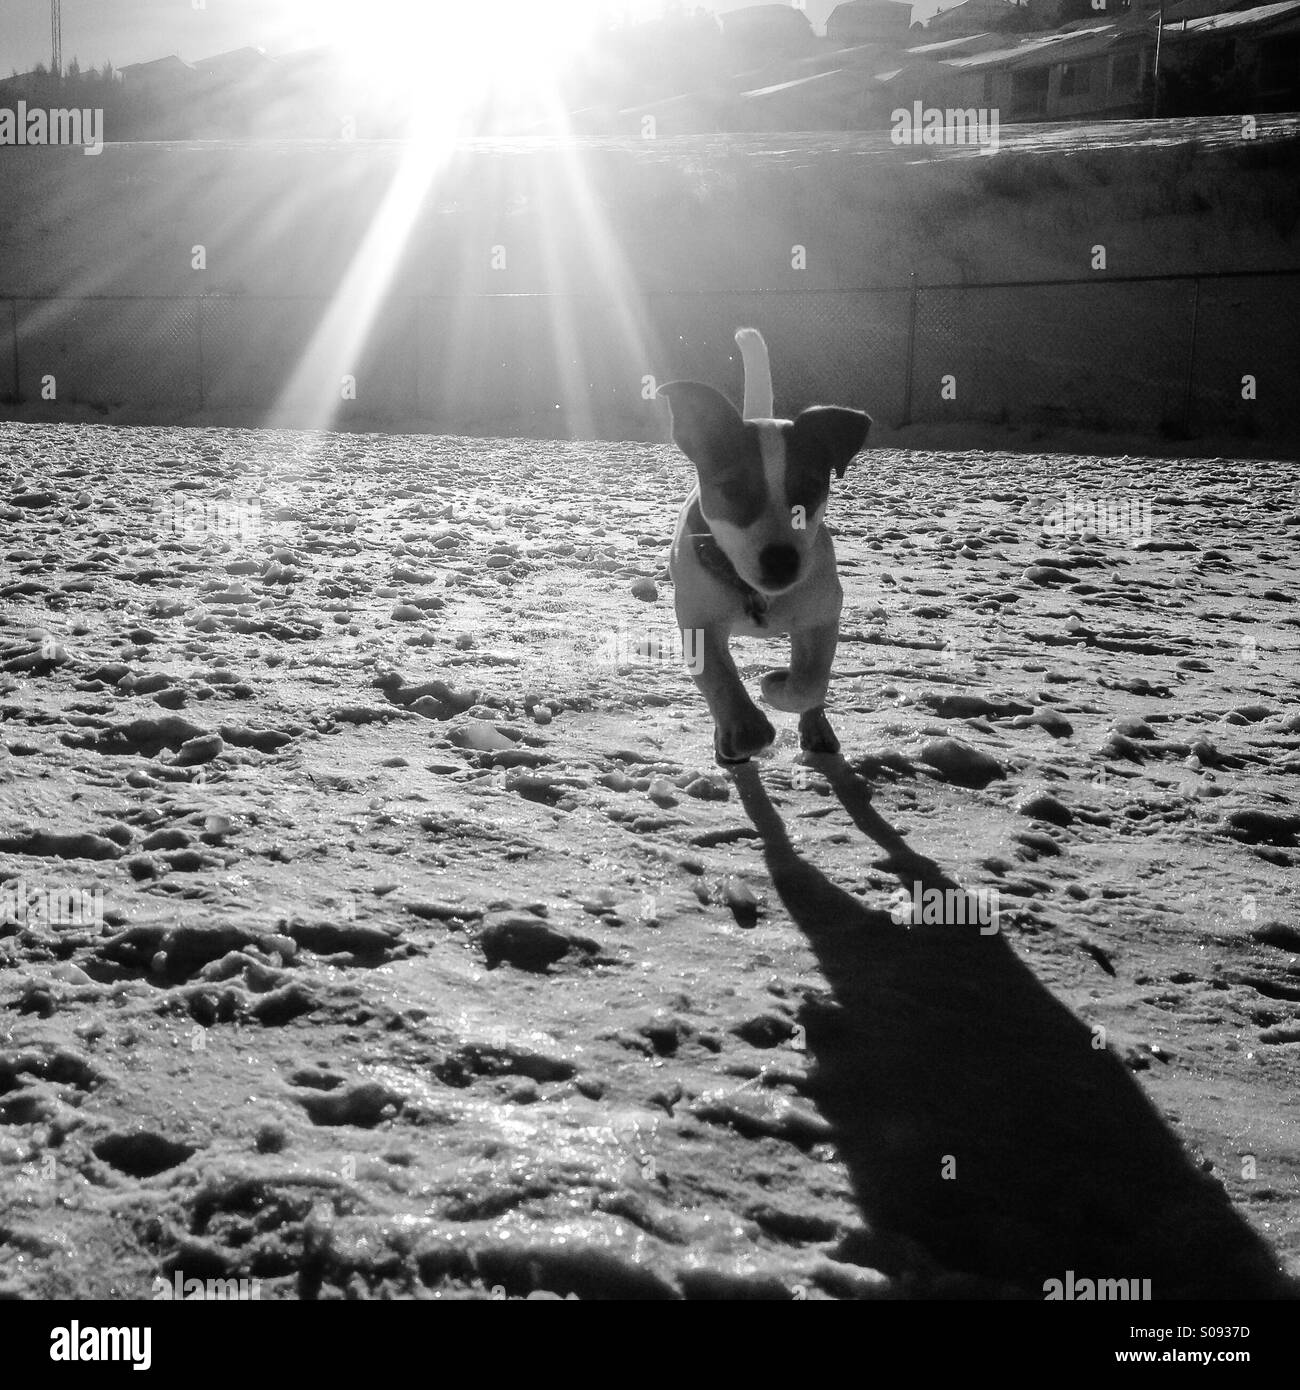 Five-month-old Jack Russell Terrier puppy running towards camera on a sunny cold winter day. Her shadow stretches out on the snowy ground. Black and white. Stock Photo